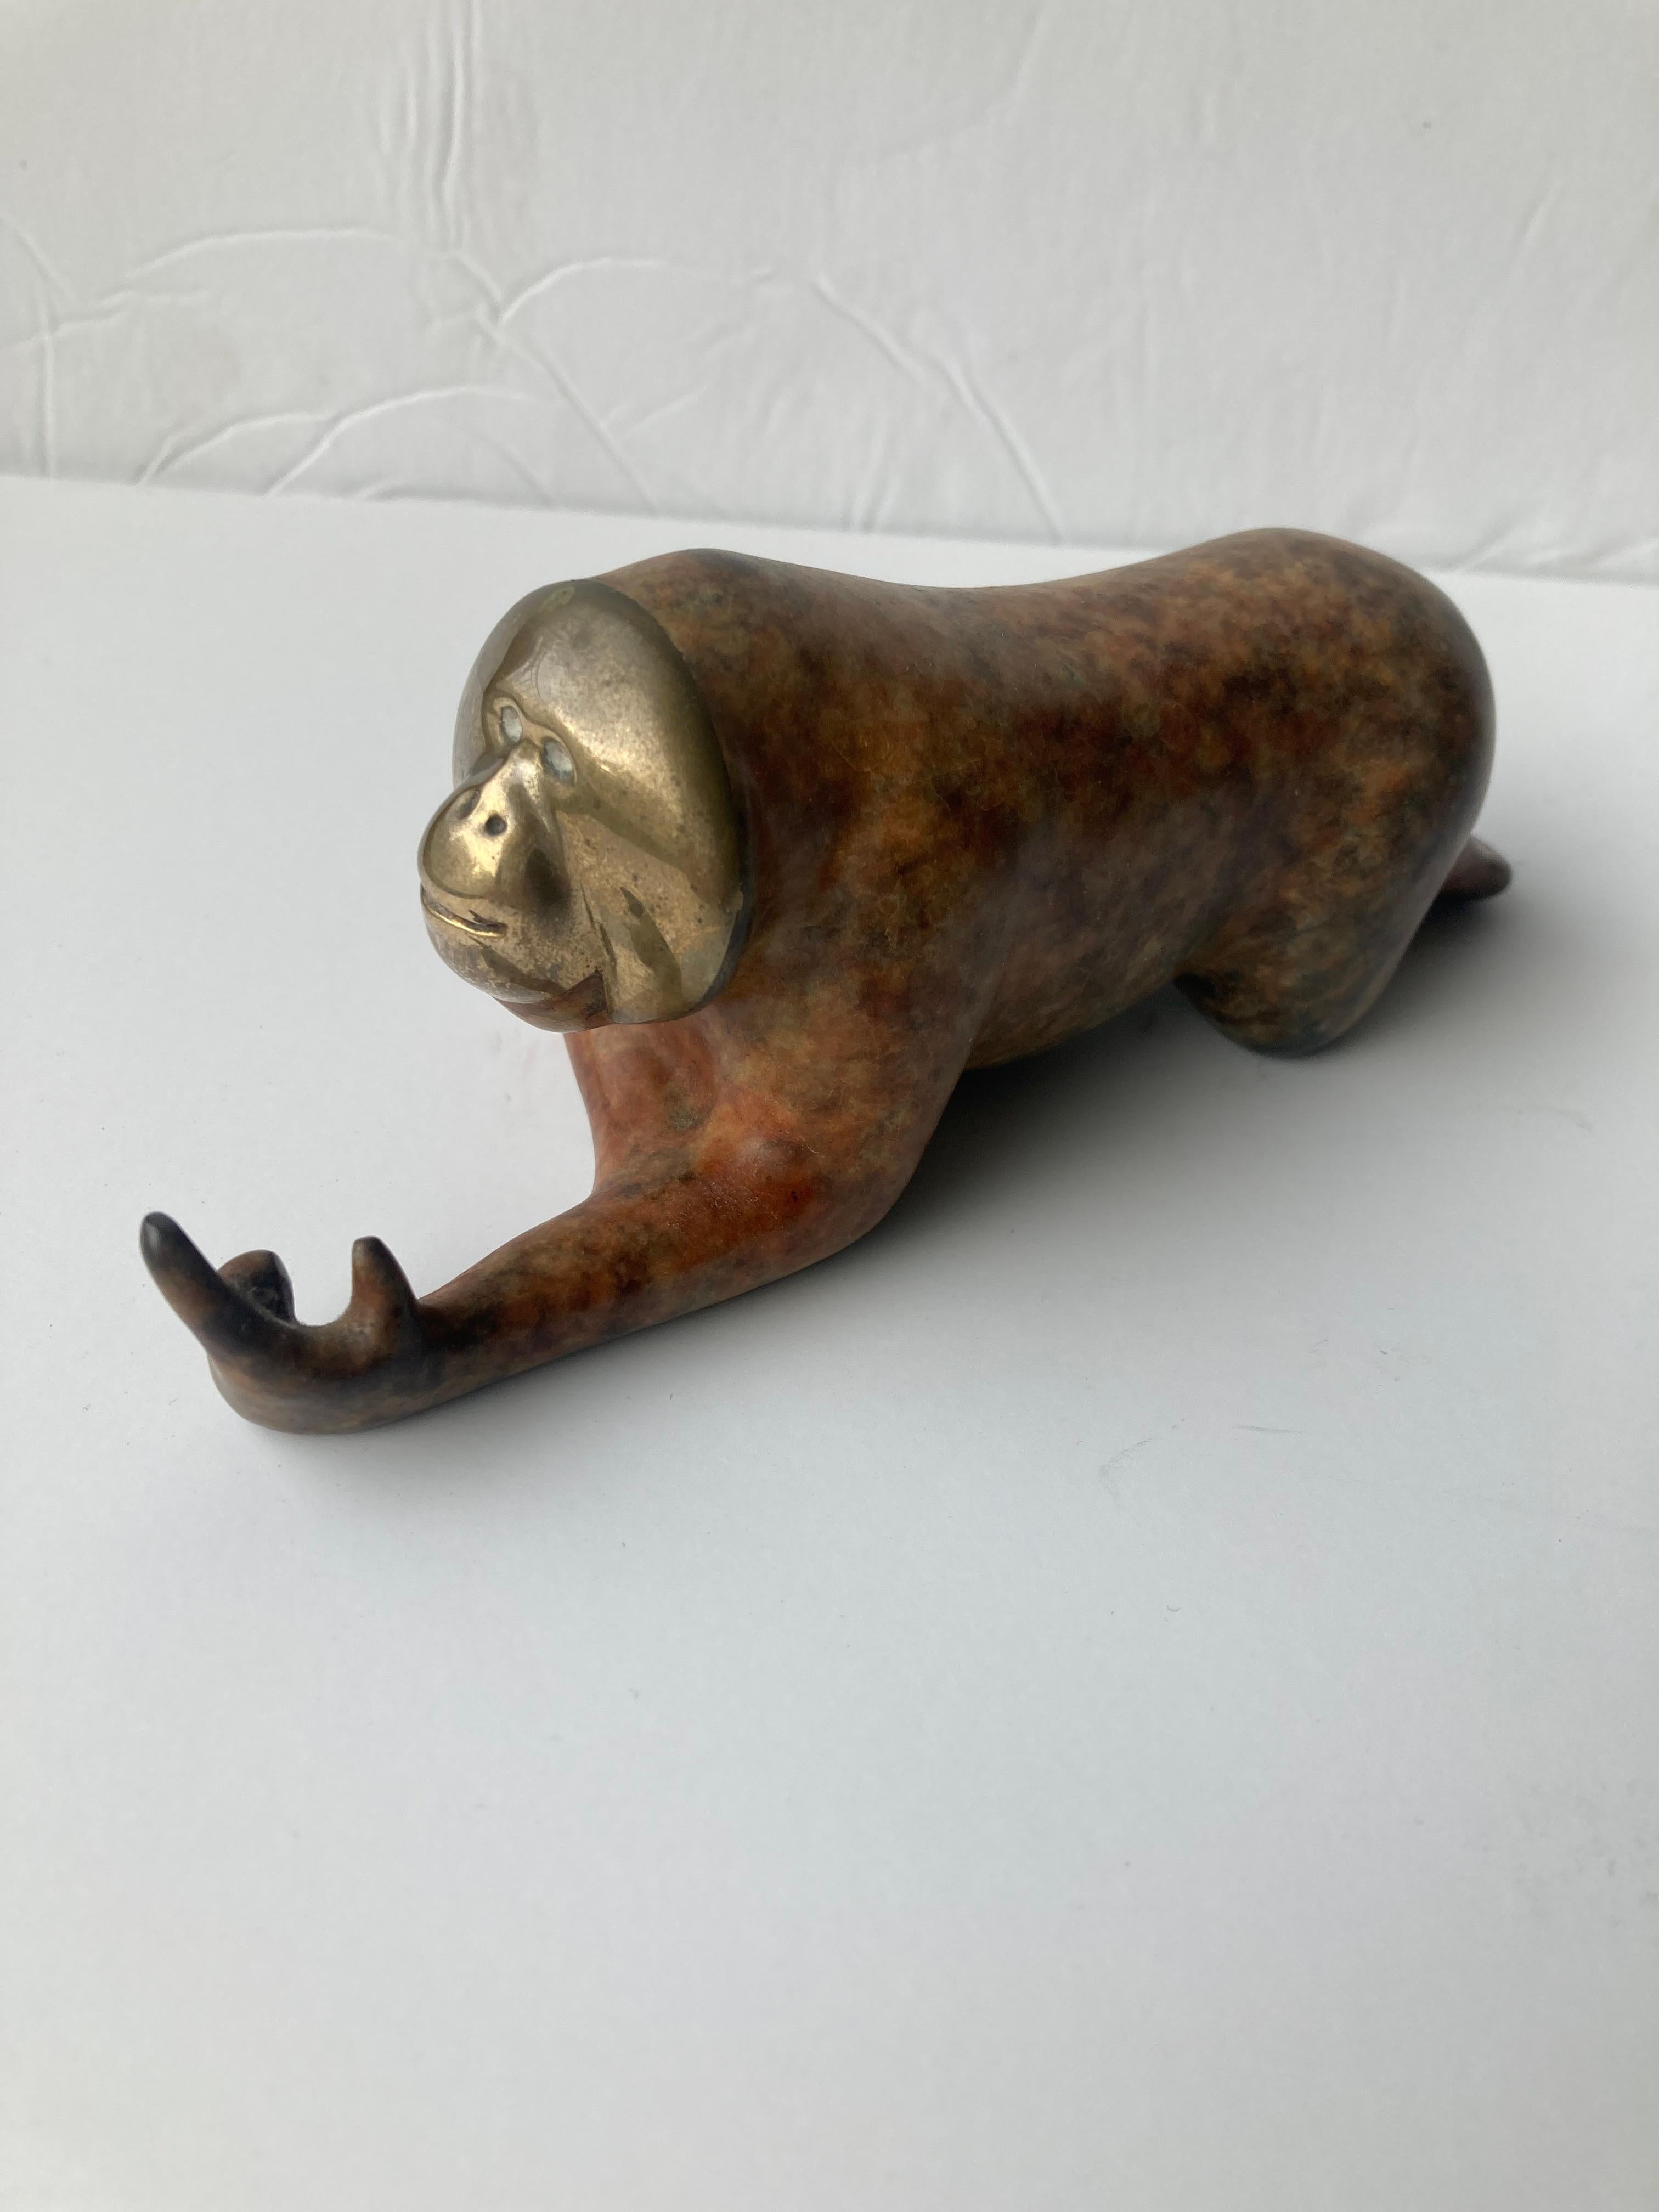 Loet Vanderveen was born in Holland and worked in fashion and later living in New York, London ,Zurich worked in the Zoo sculptures using great patinas. This orangutan is signed and numbered 304/2500.